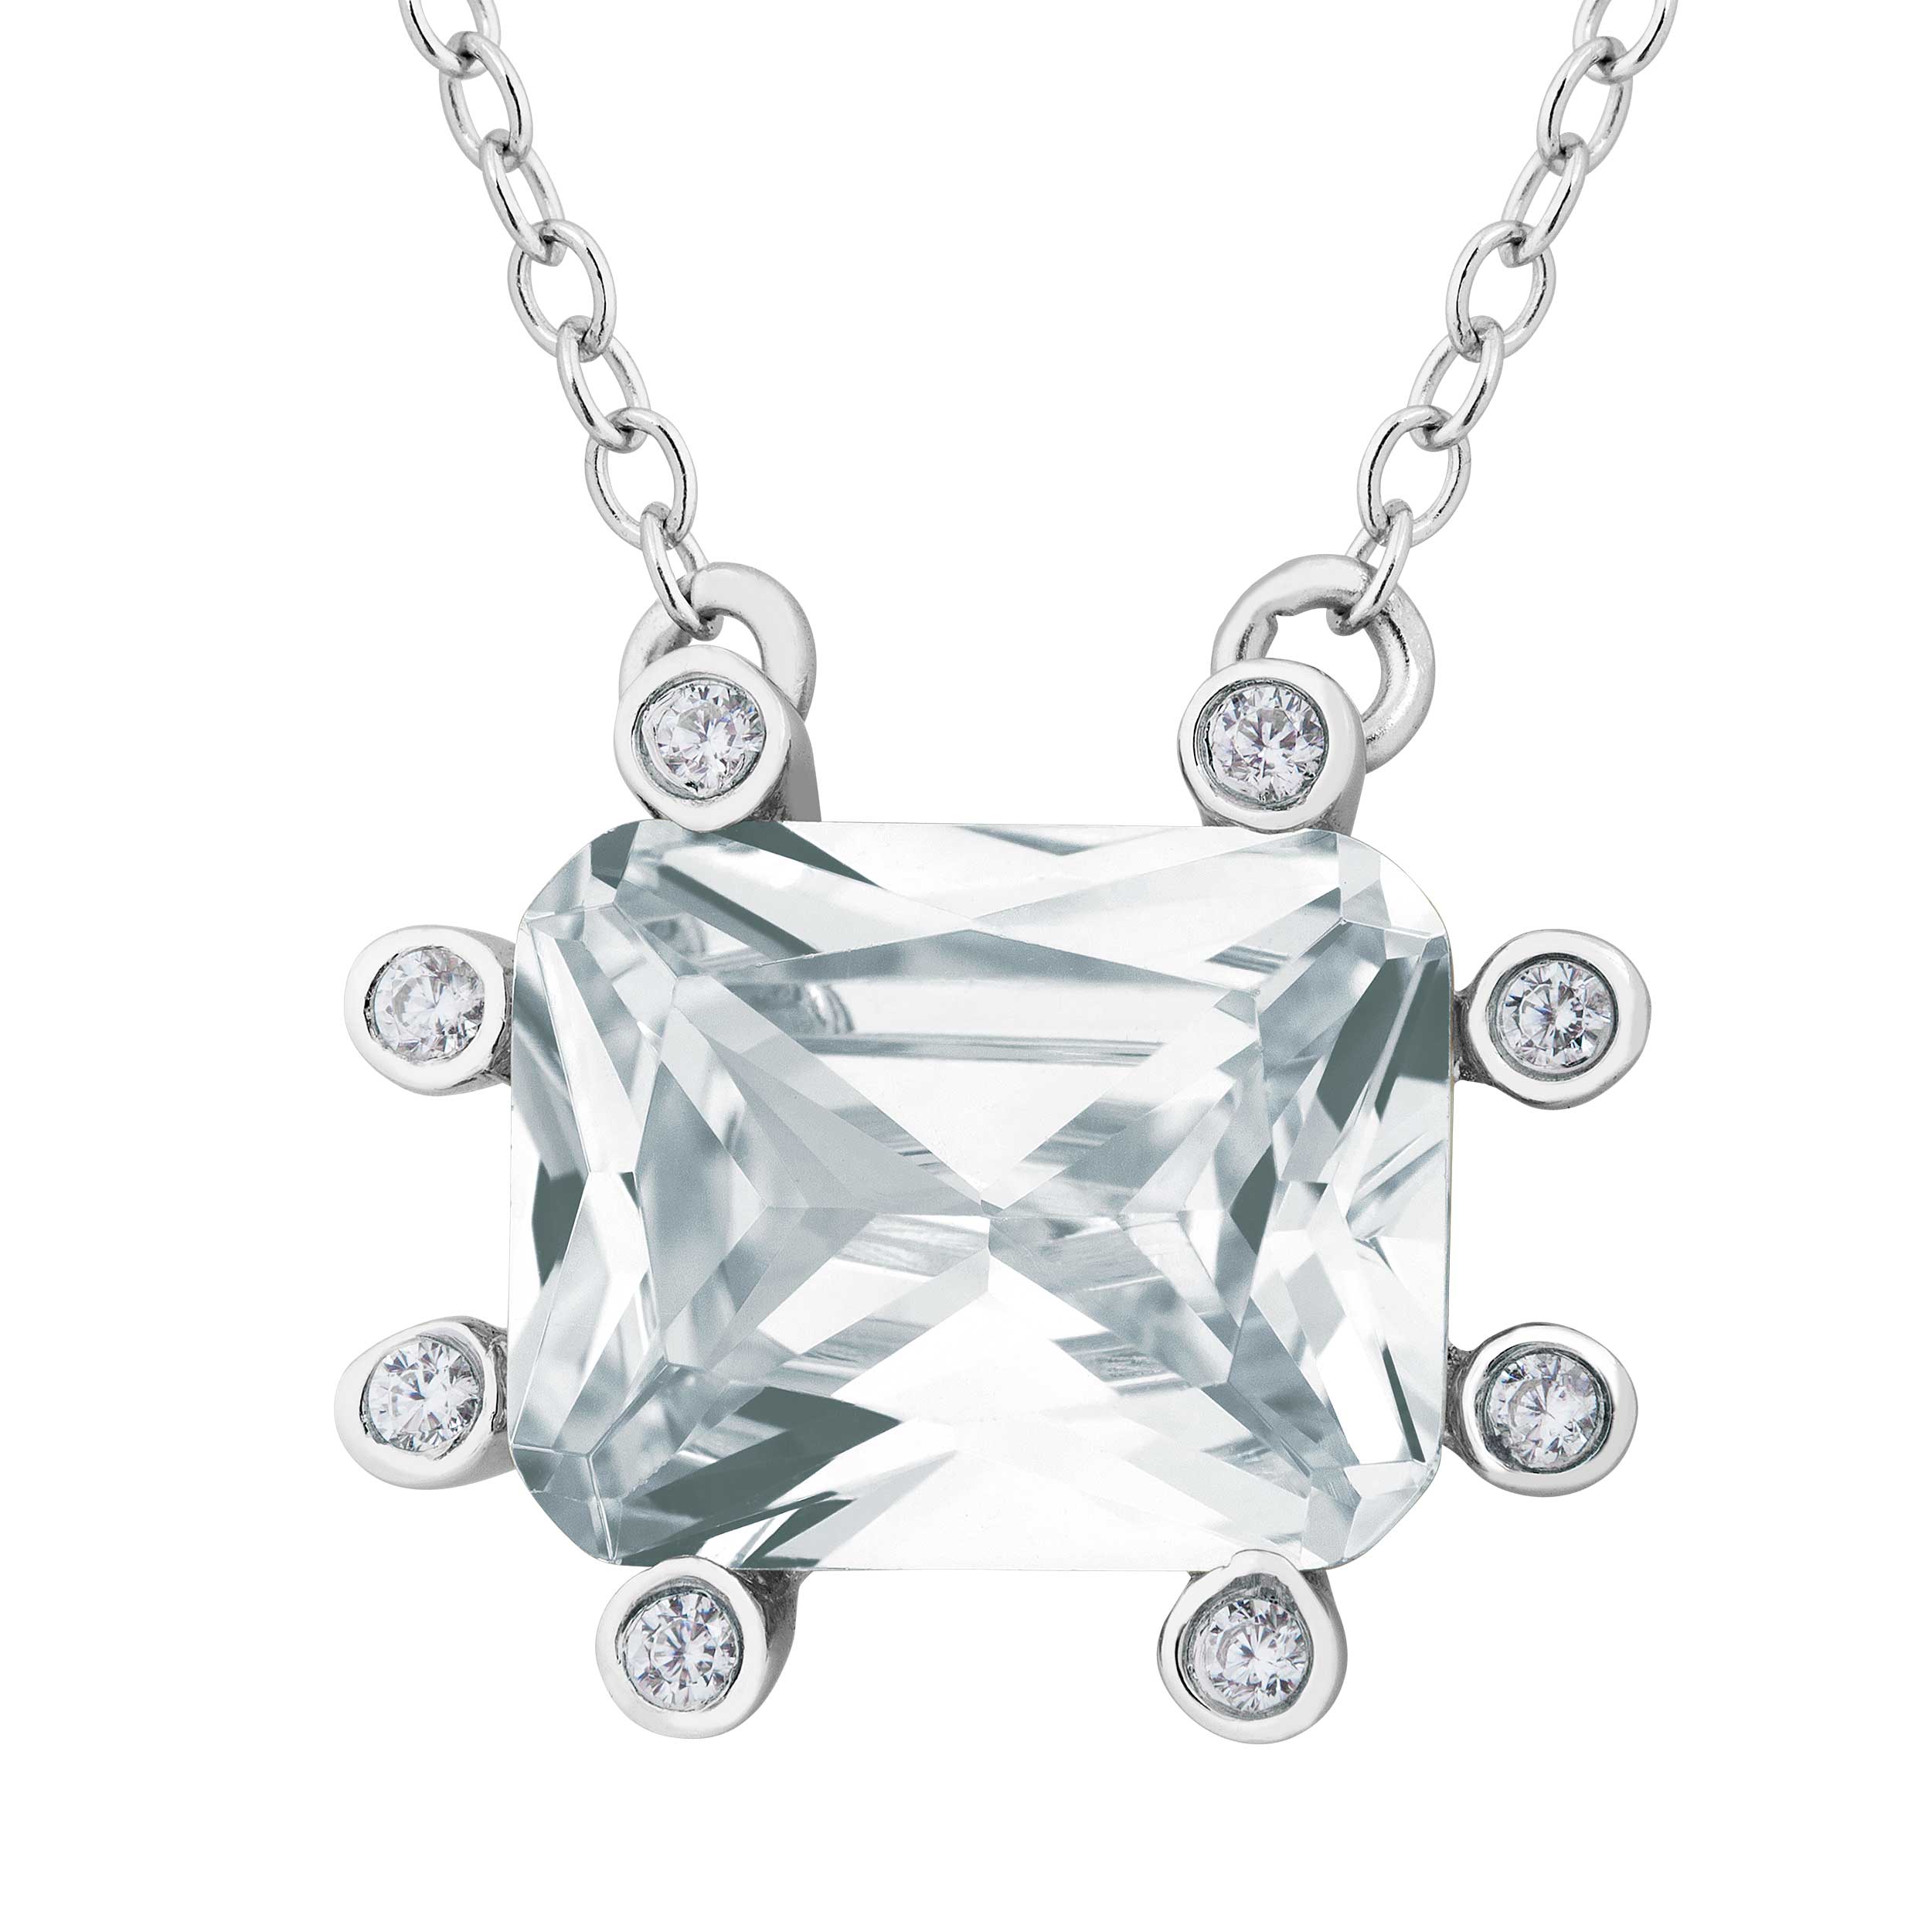   White Topaz Pendant Necklace, Rhodium Plated Sterling Silver